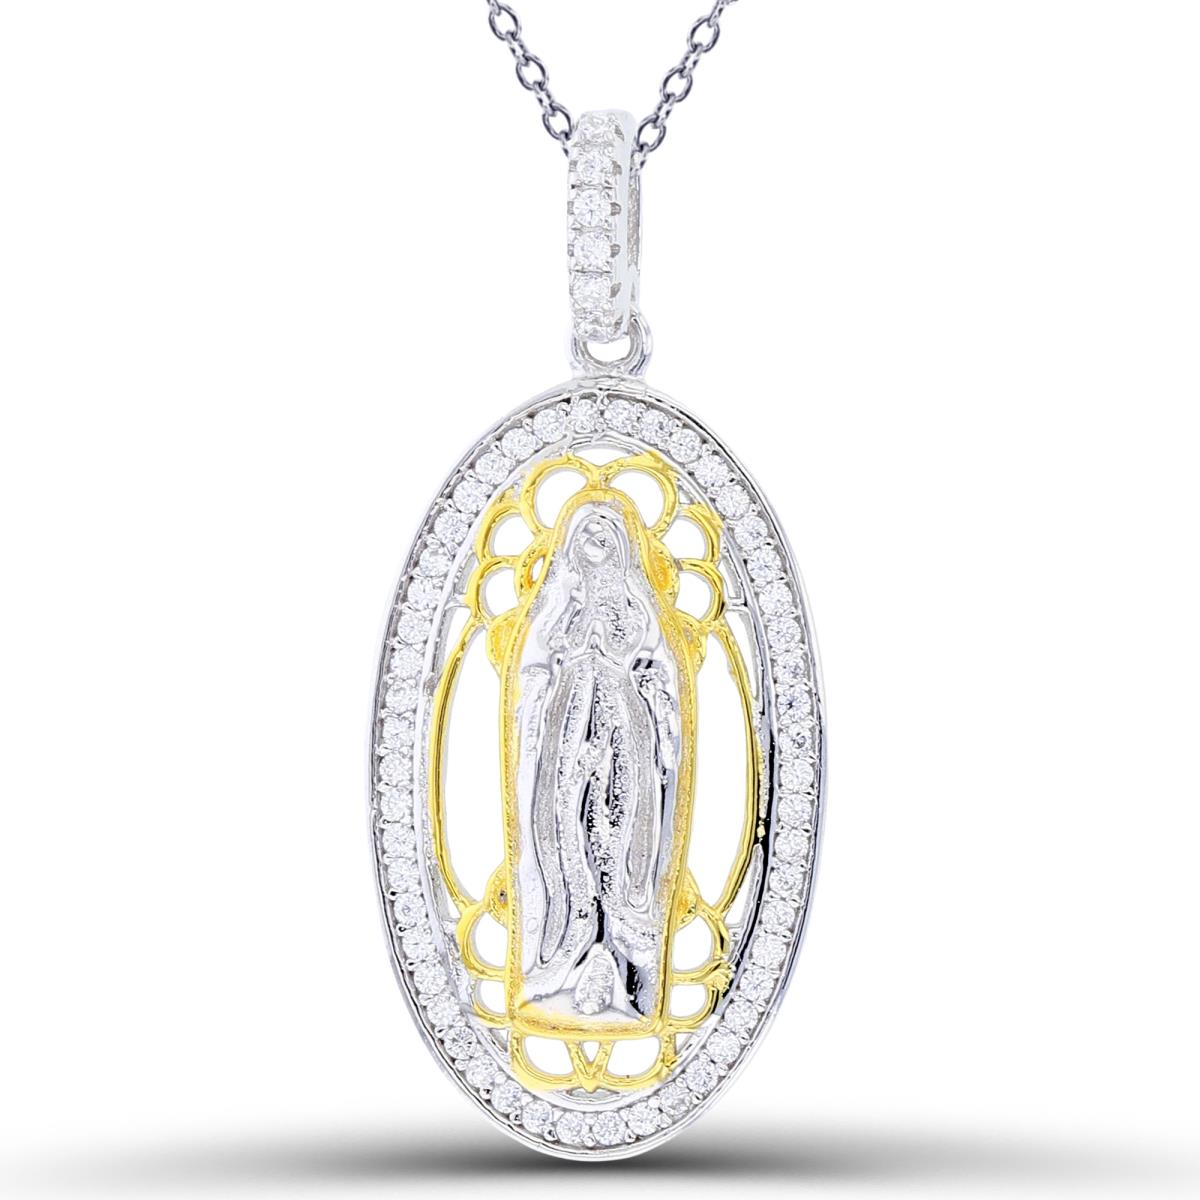 Sterling Silver Two-Tone (Y/W) Rnd White CZ Polish & Textured Vergin Mary Oval 18"Necklace